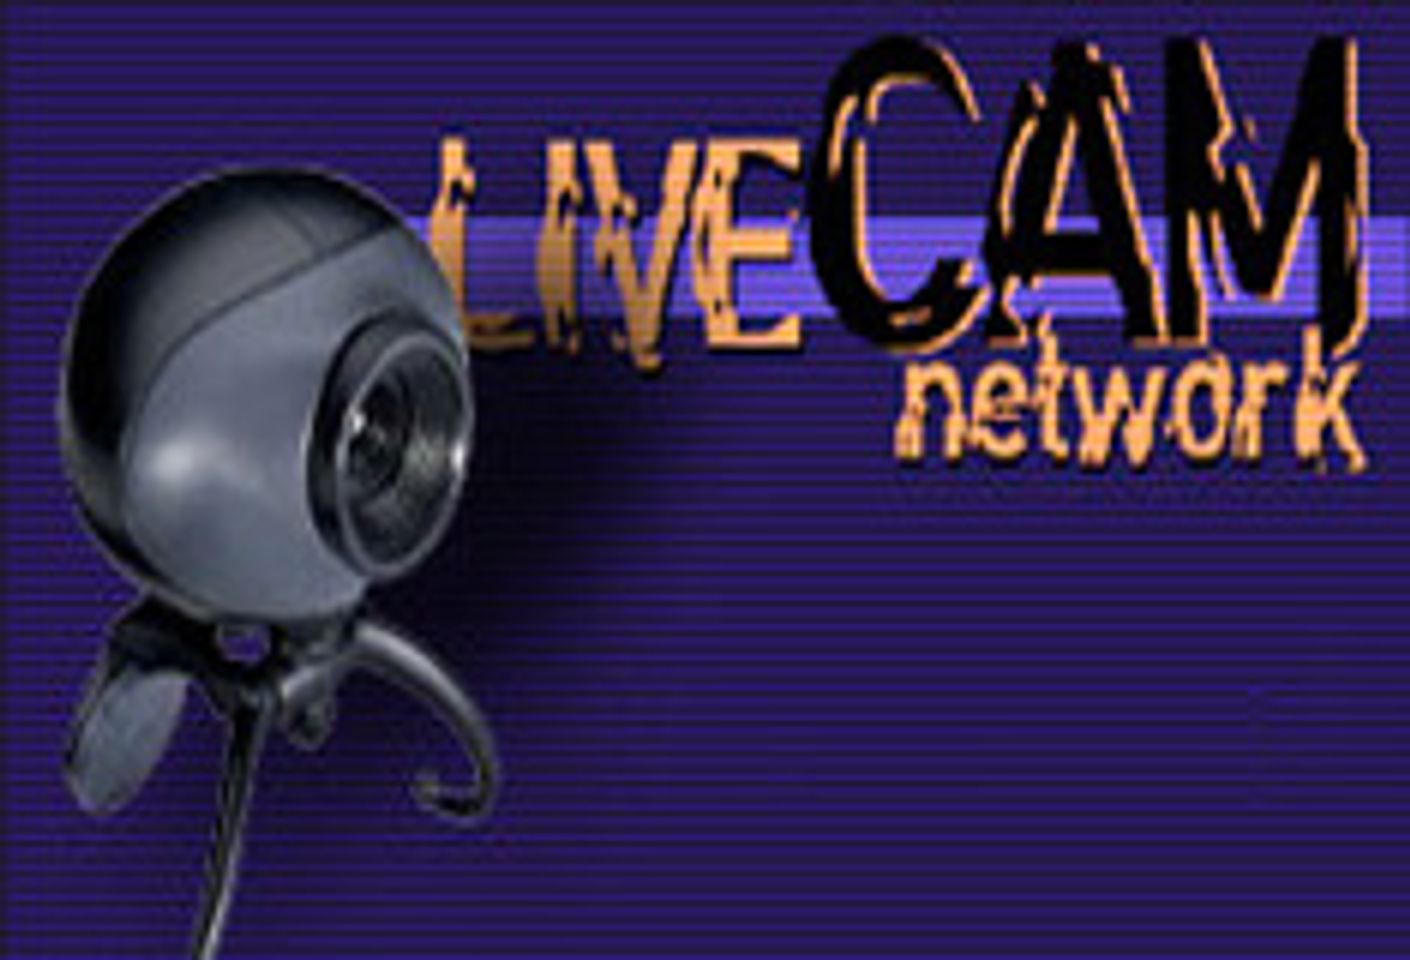 LiveCamNetwork.com Open to Firefox Users